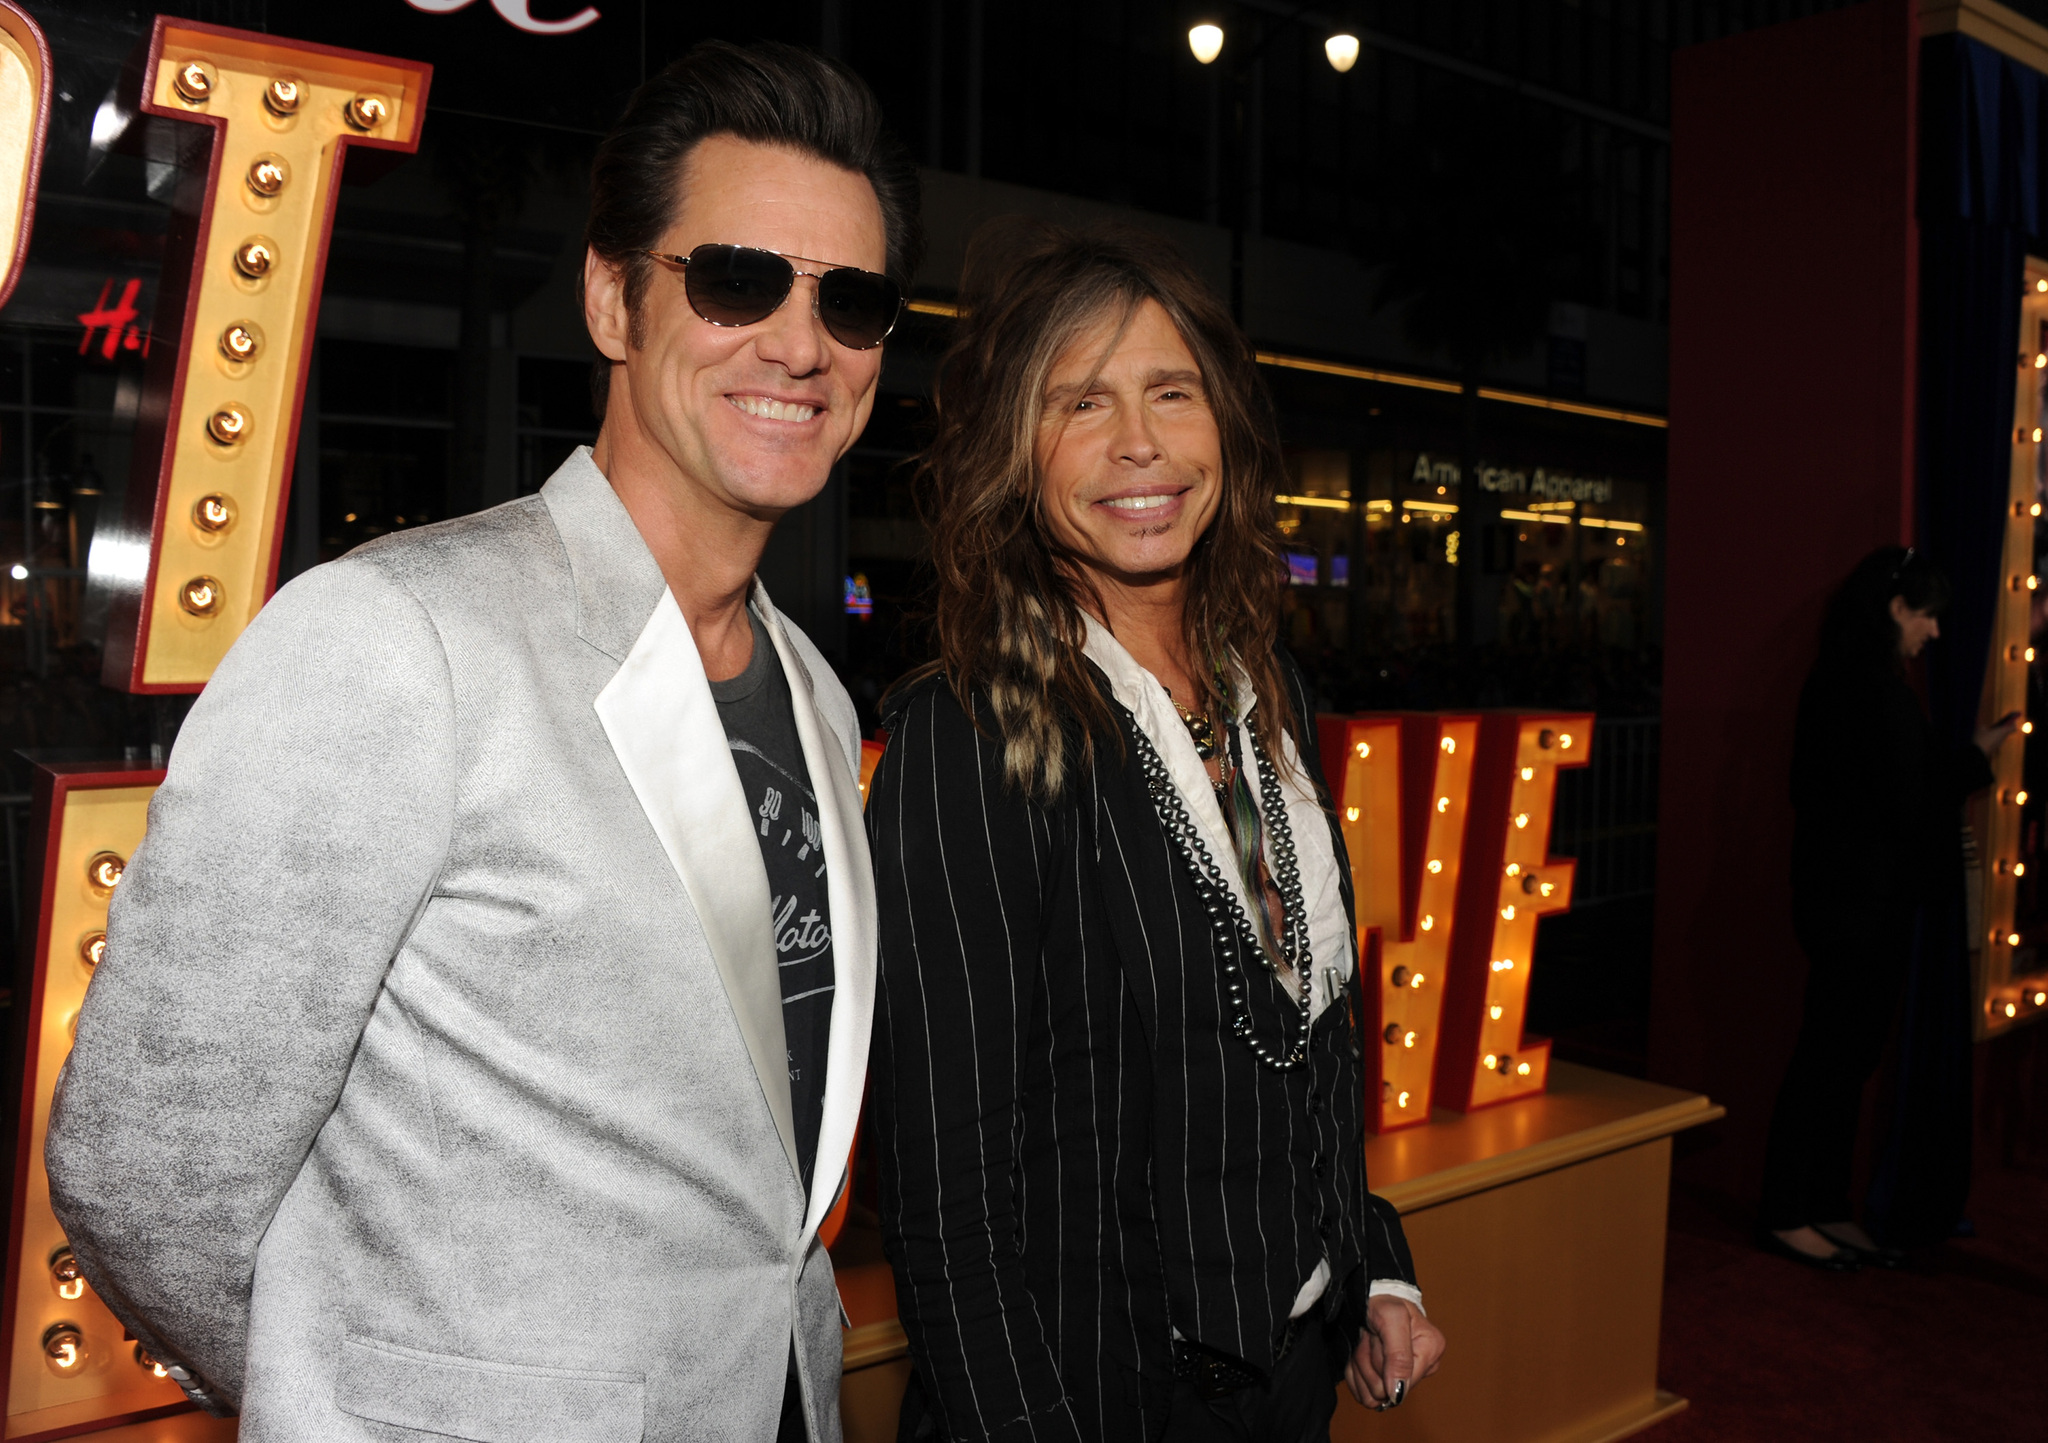 Jim Carrey and Steven Tyler at event of The Incredible Burt Wonderstone (2013)